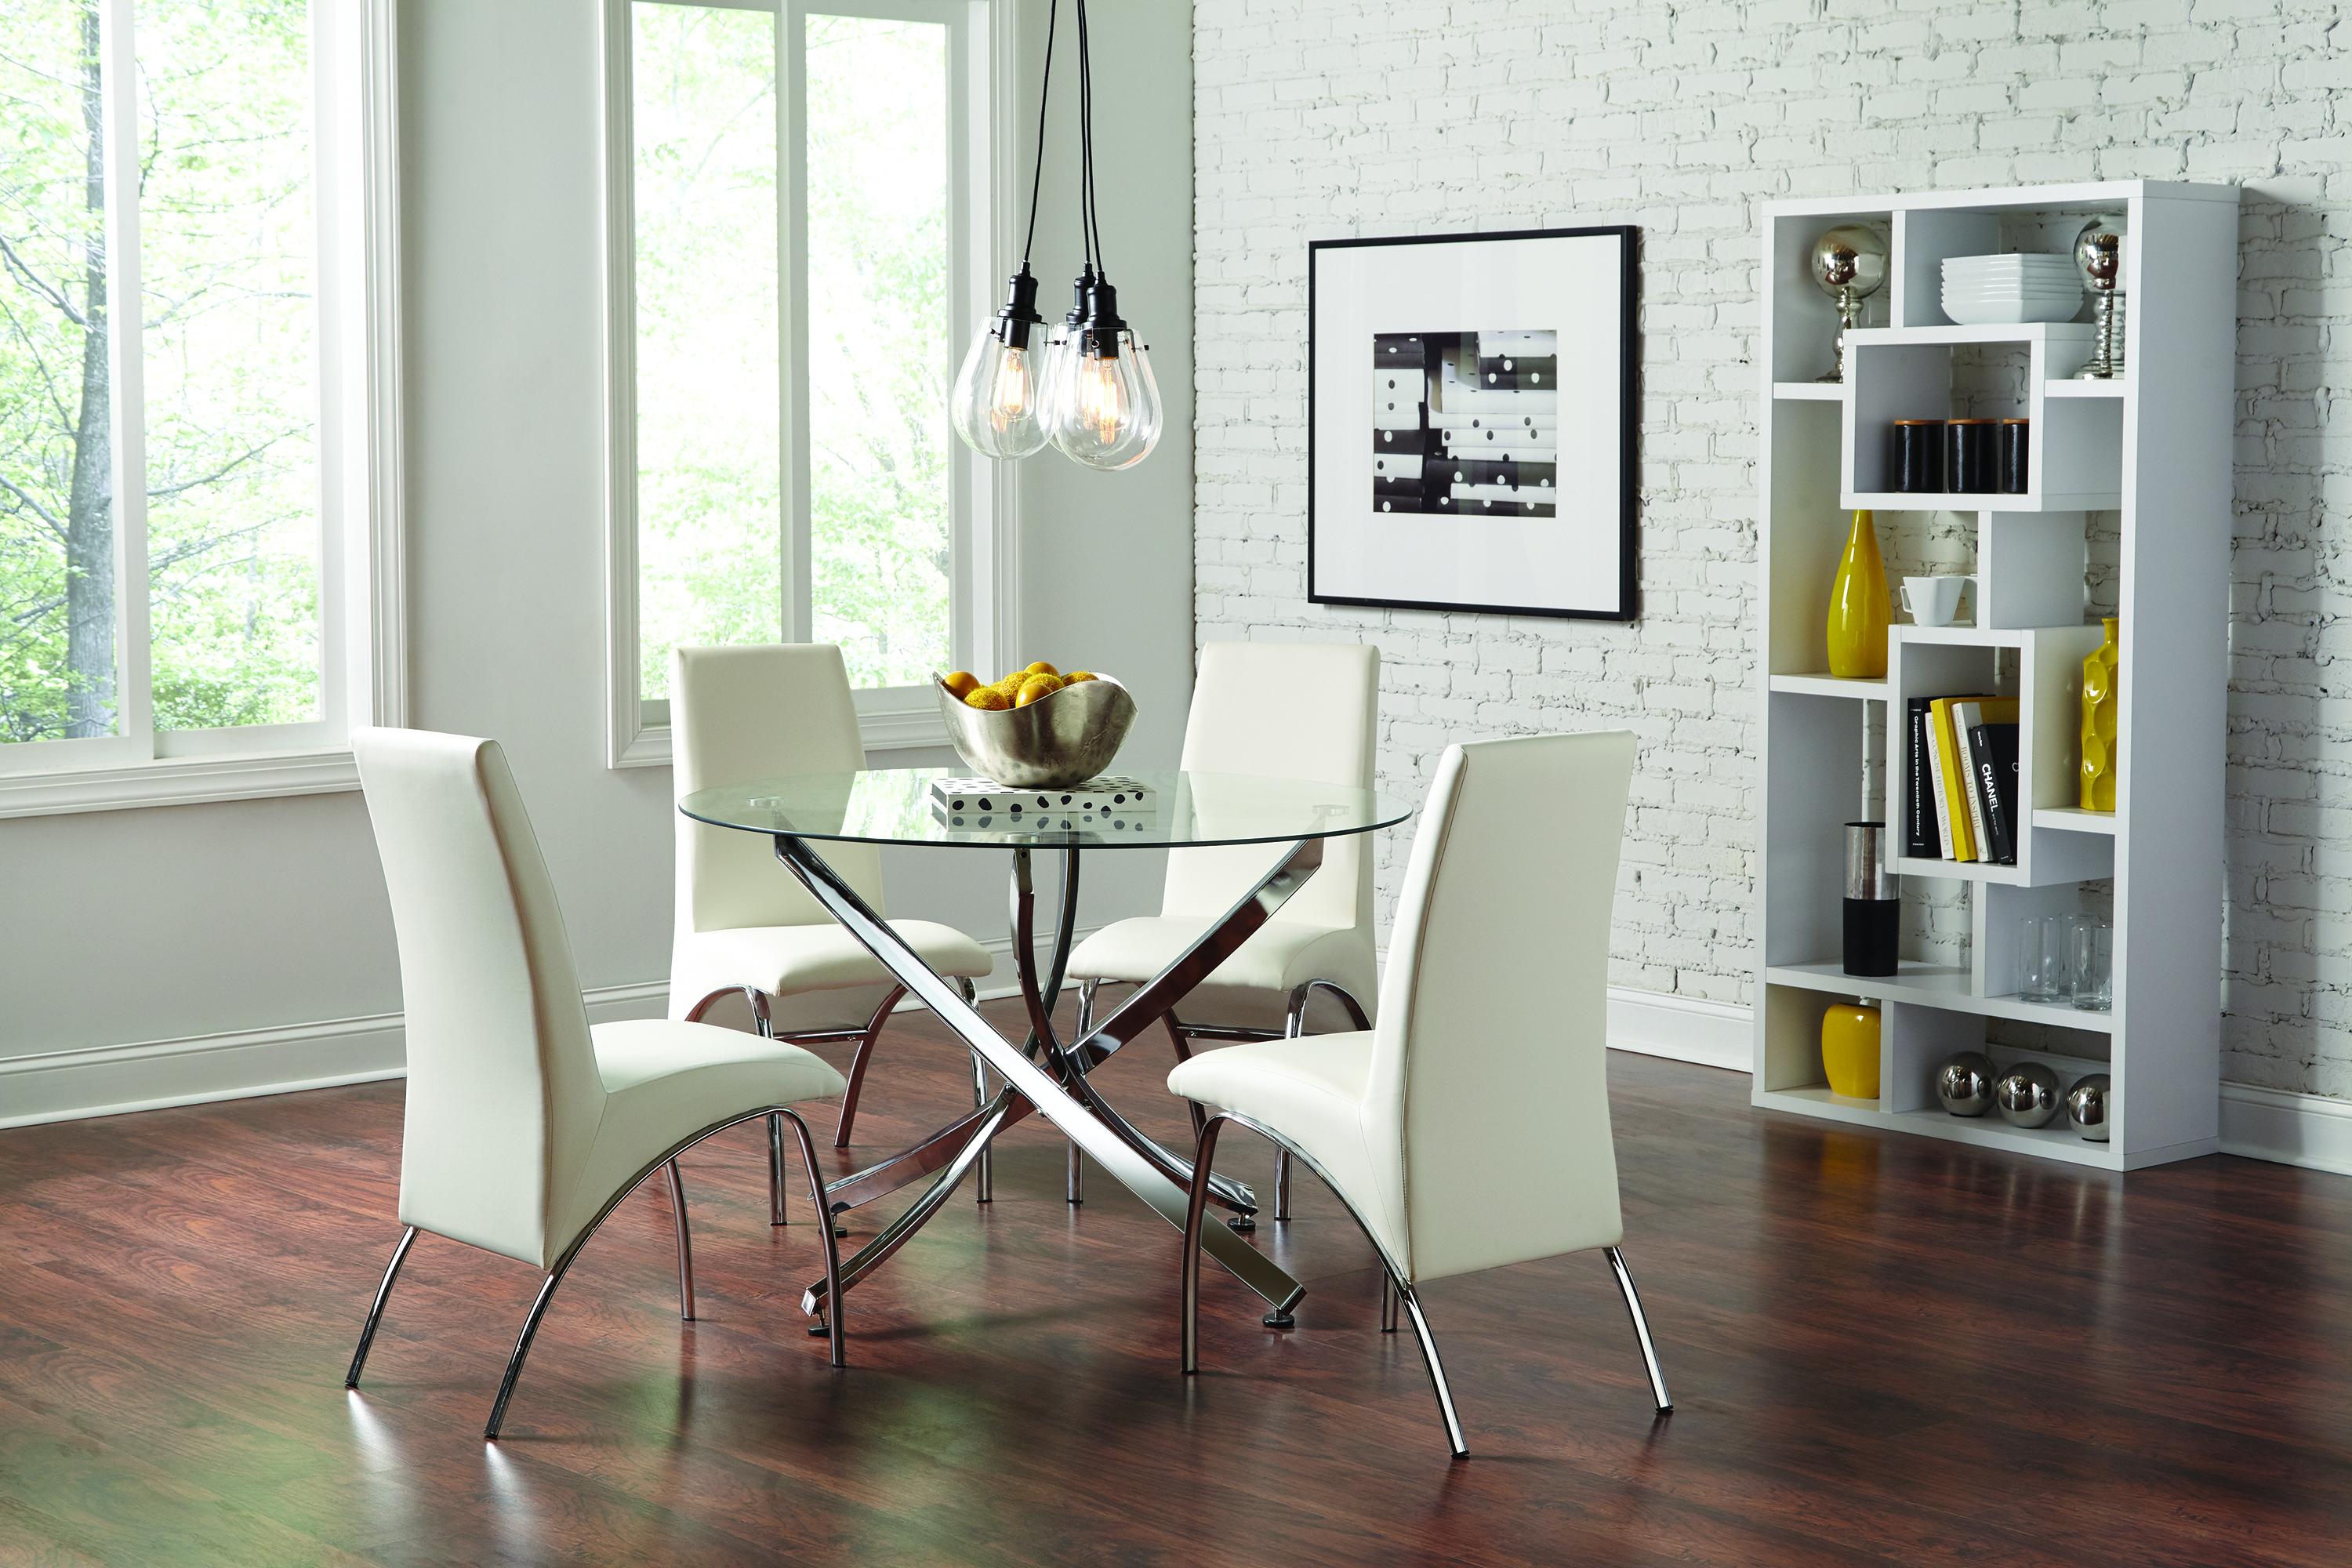 Contemporary Dining Room Set 106440-S5 Beckham 106440-S5 in Chrome Leatherette